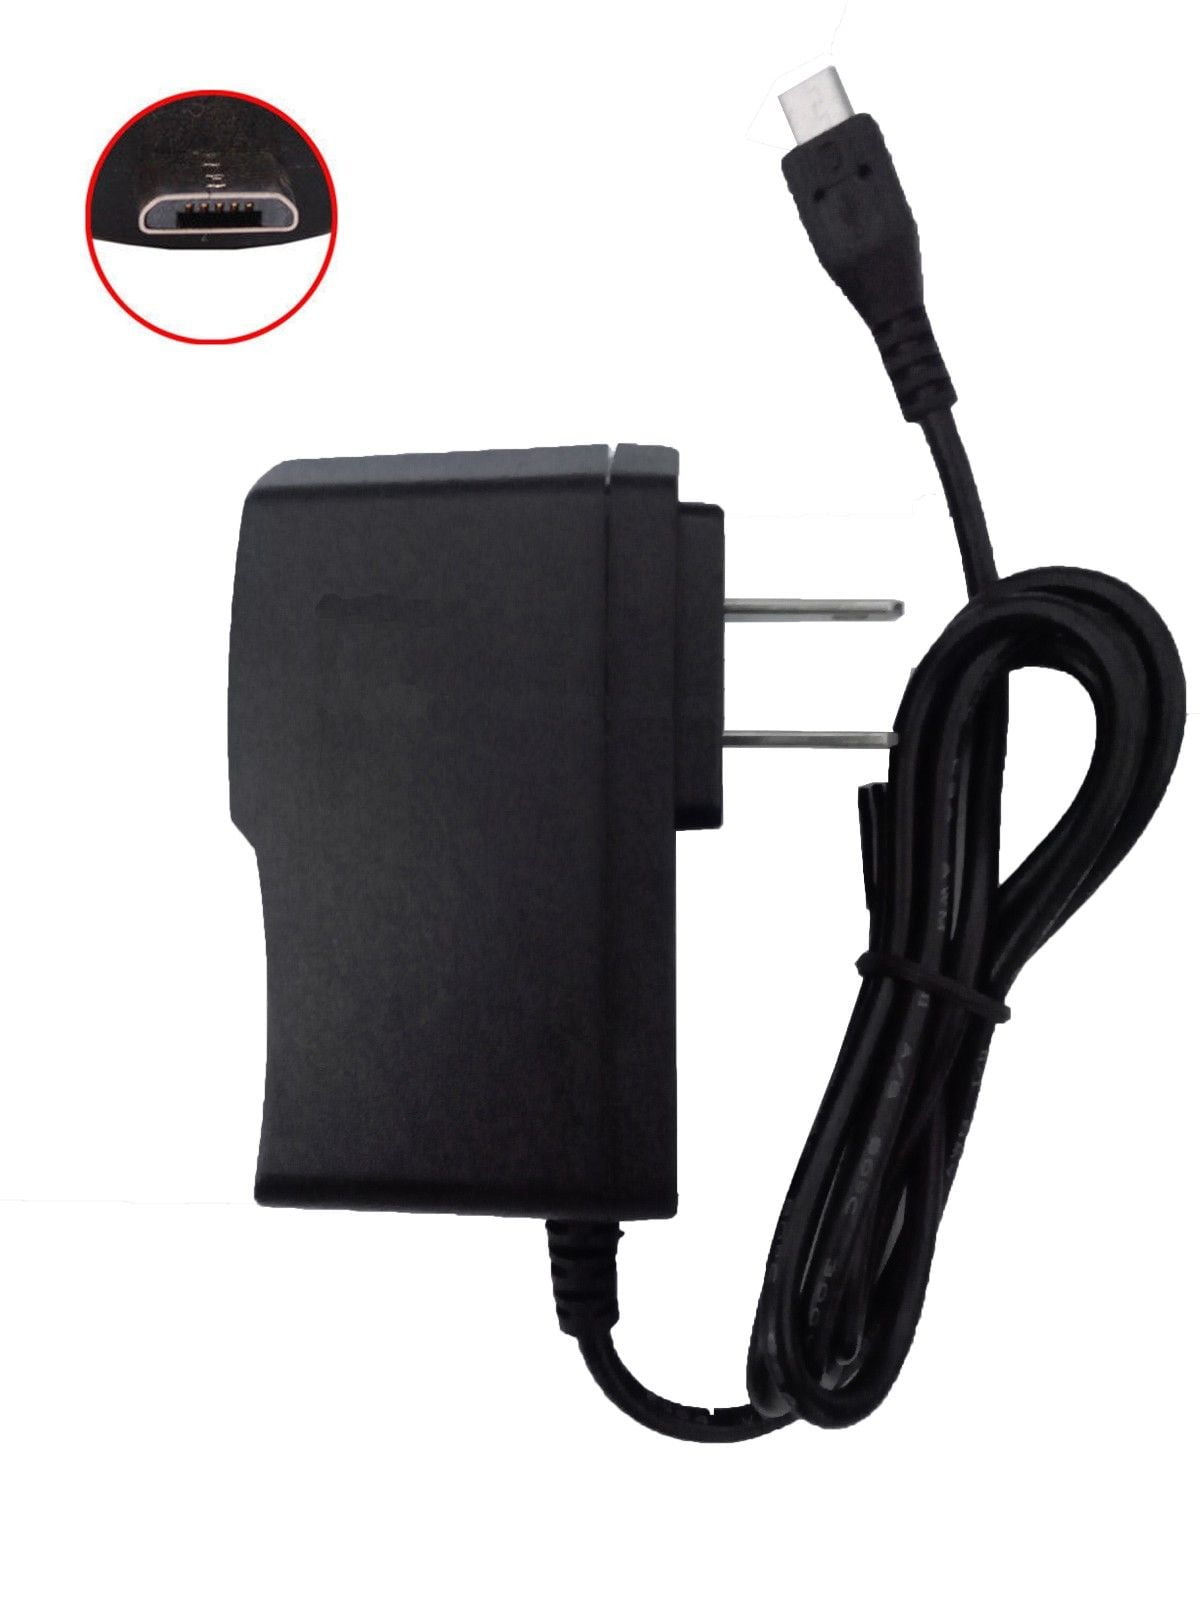 yan USB Charger Cable Power Charging Cord for RCA 10 Viking PRO RCT6303W87 DK Tablet 